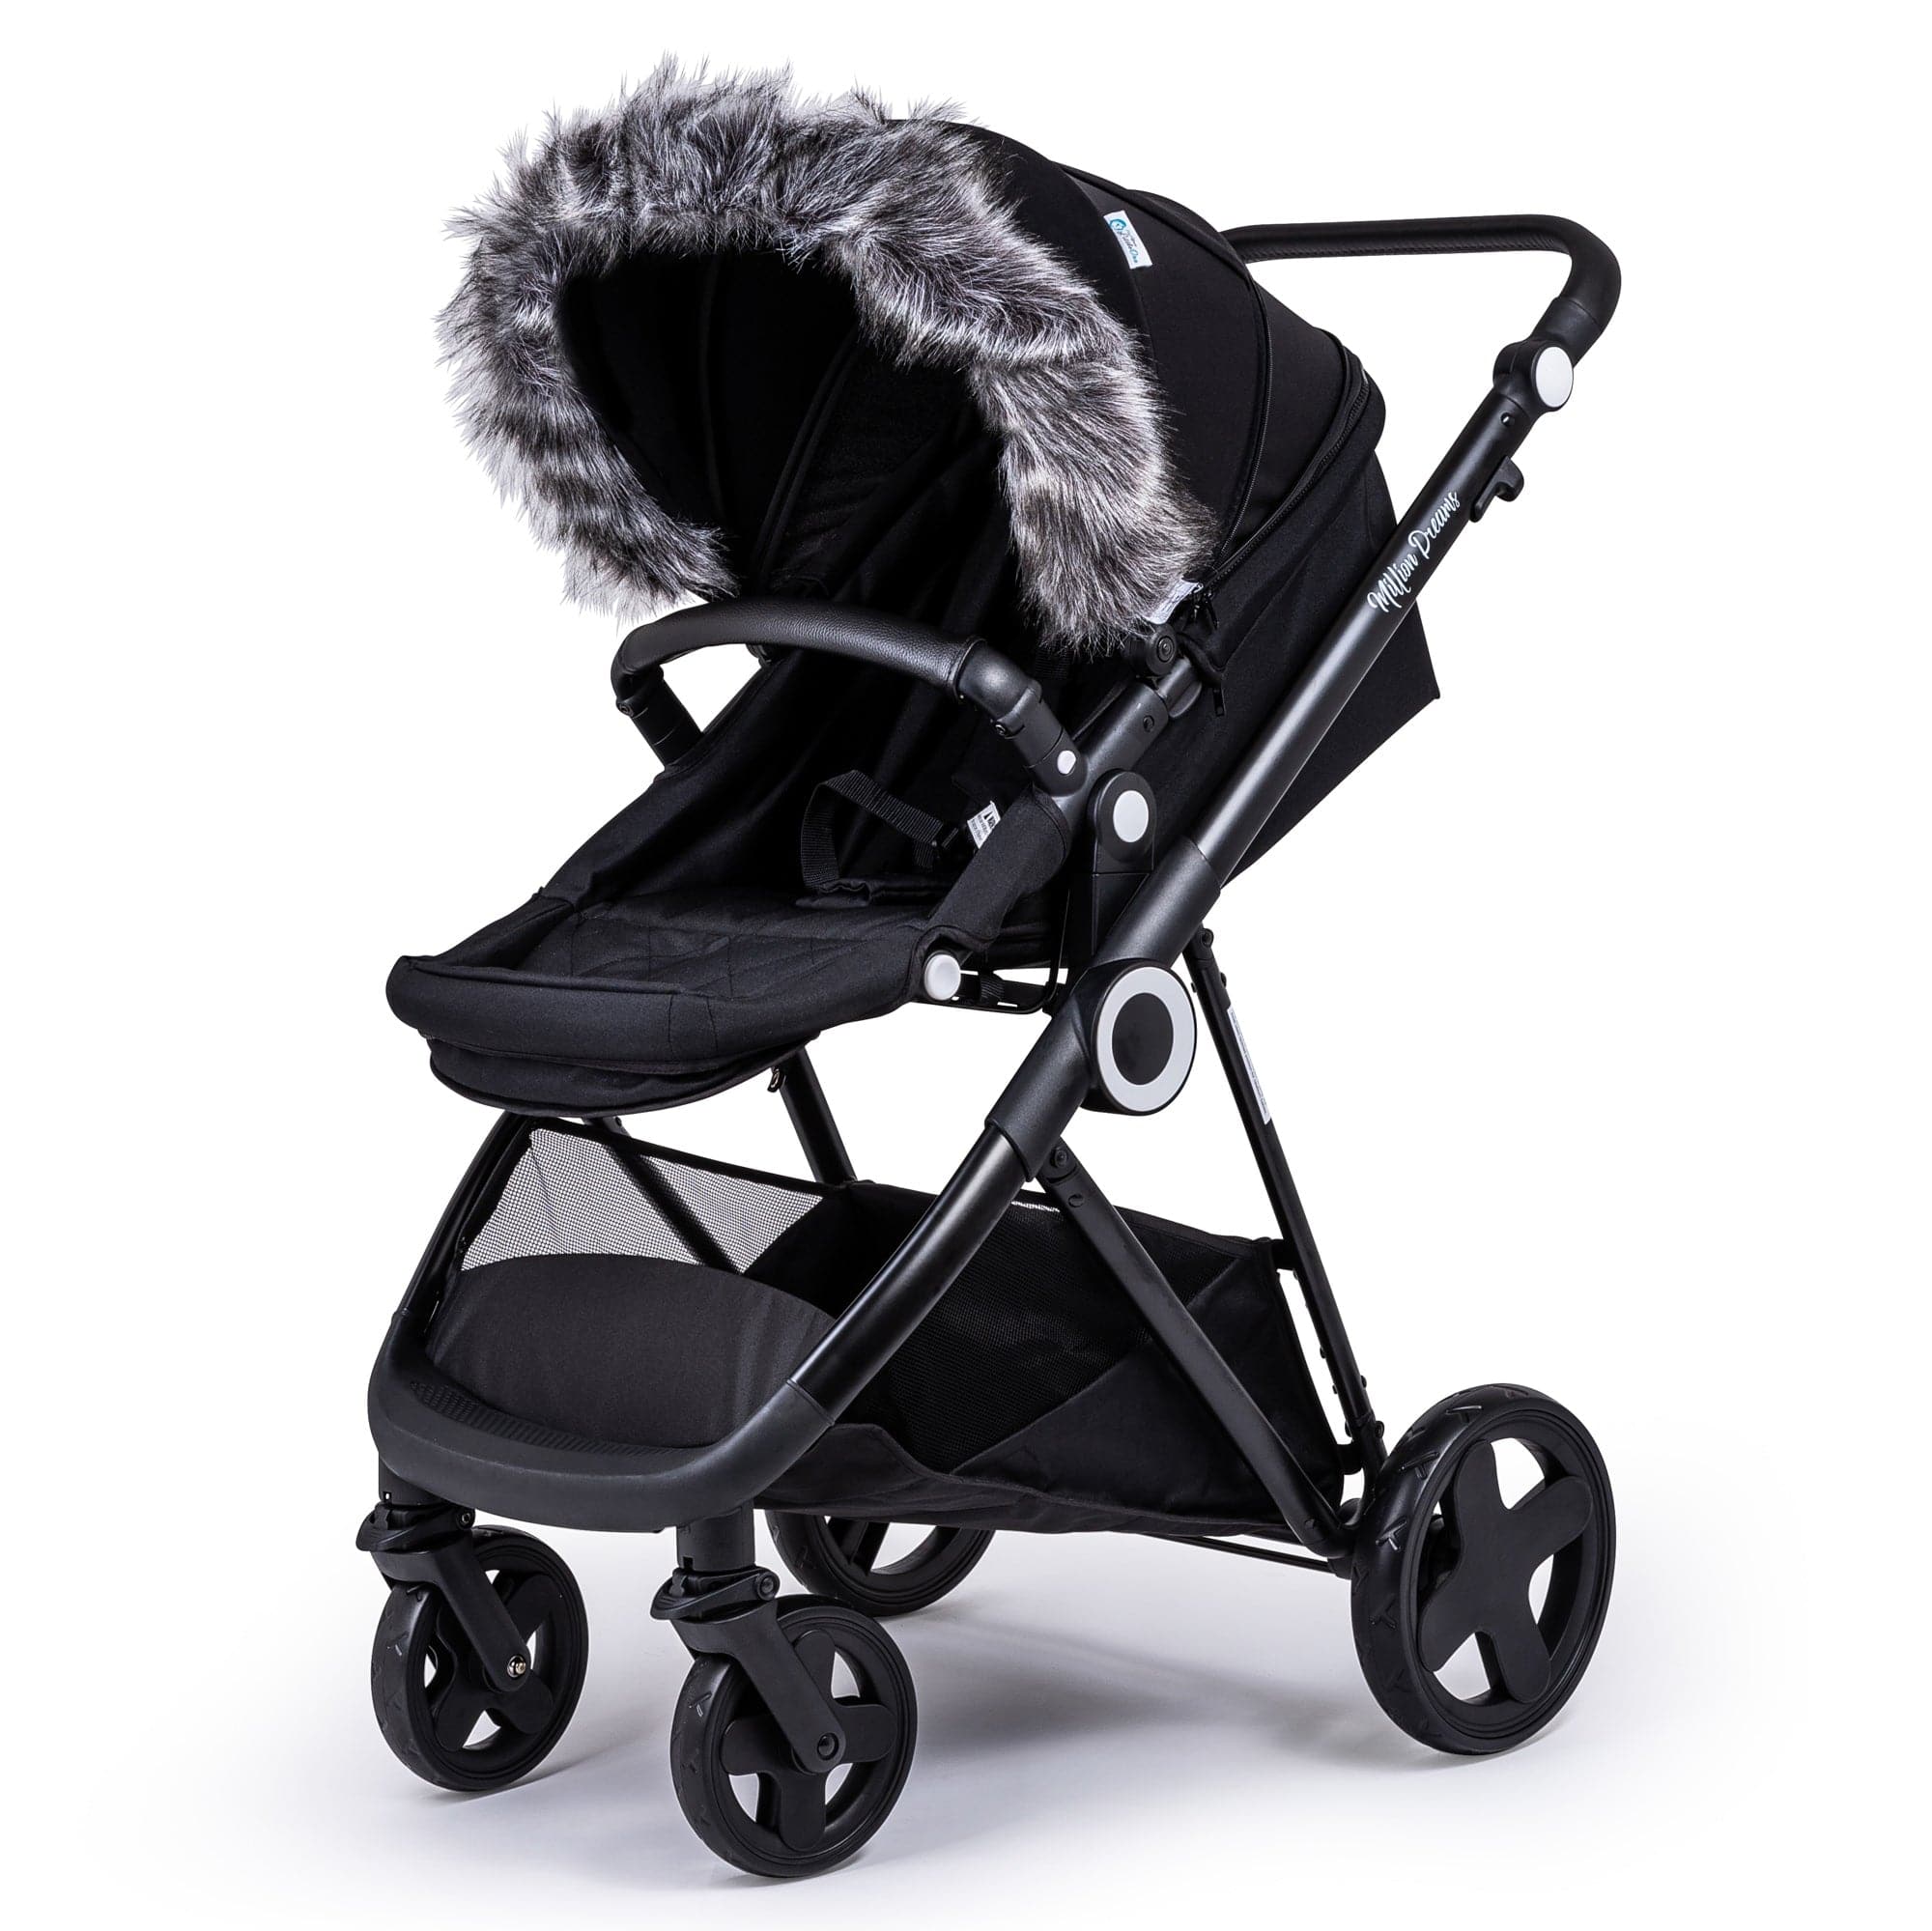 Pram Fur Hood Trim Attachment For Pushchair Compatible with Kids Kargo - Dark Grey / Fits All Models | For Your Little One